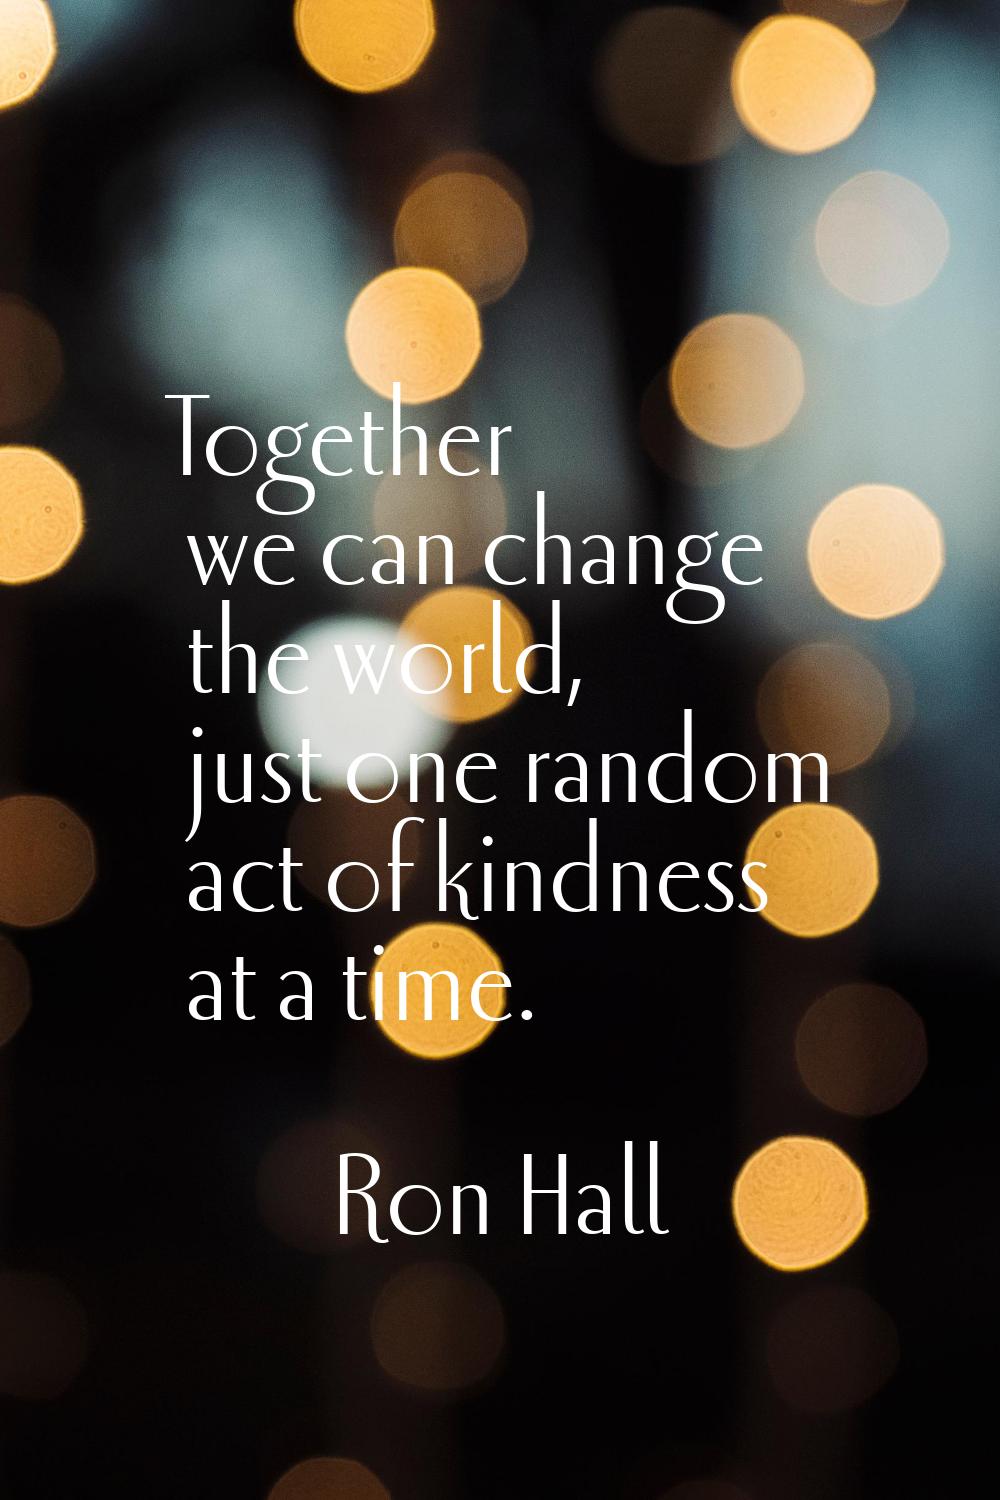 Together we can change the world, just one random act of kindness at a time.